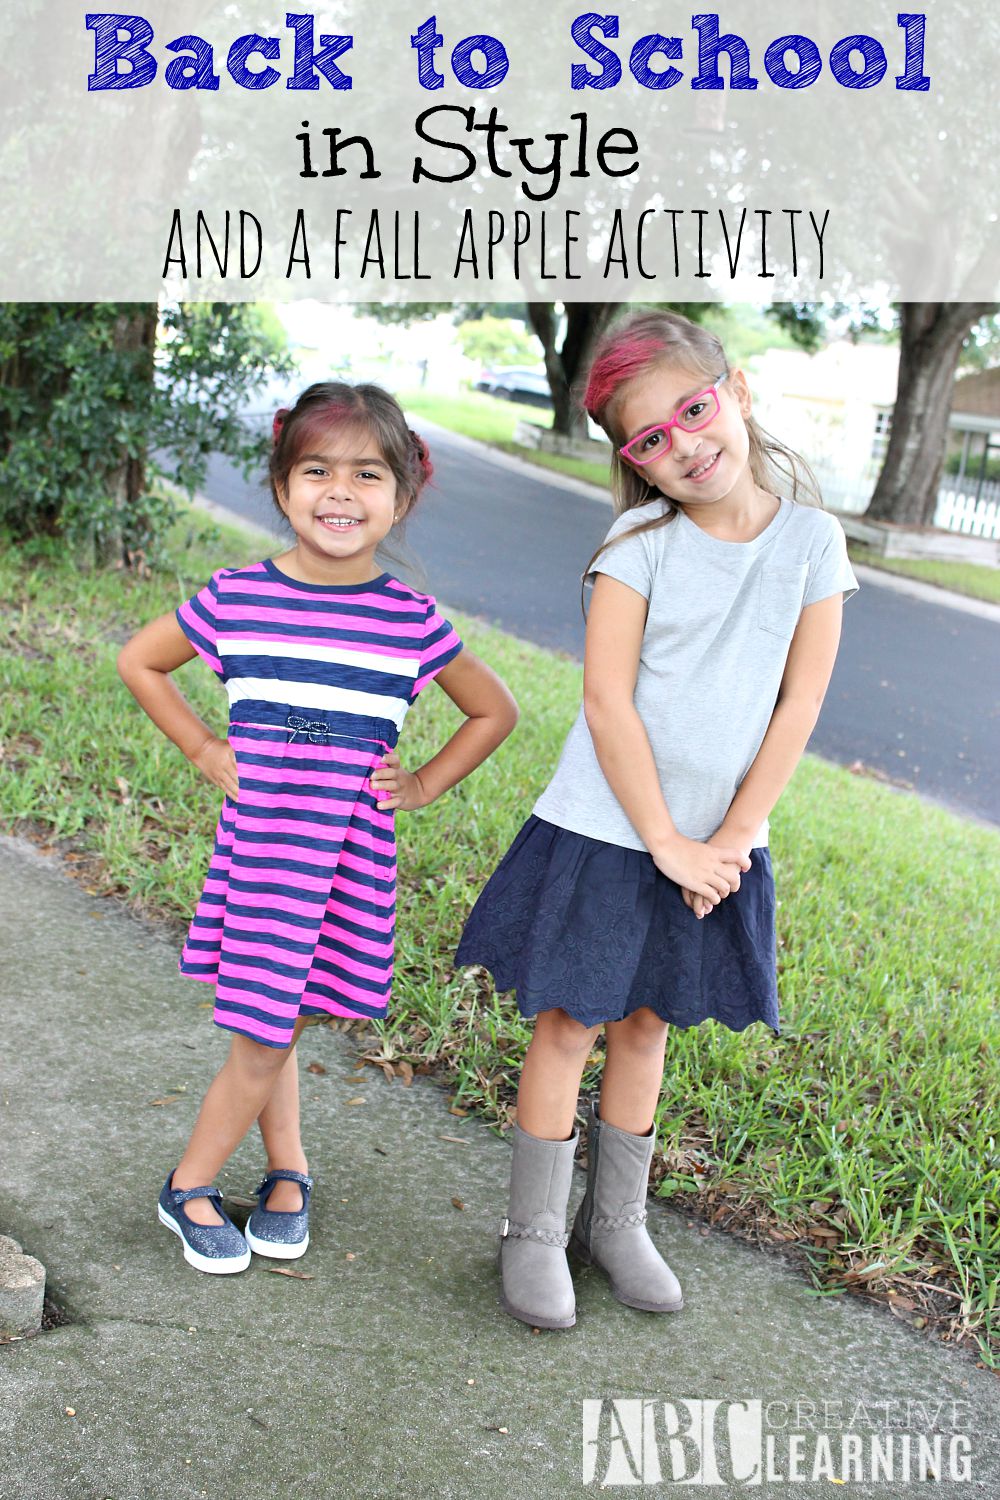 Back to School in Style and a Fall Apple Activity